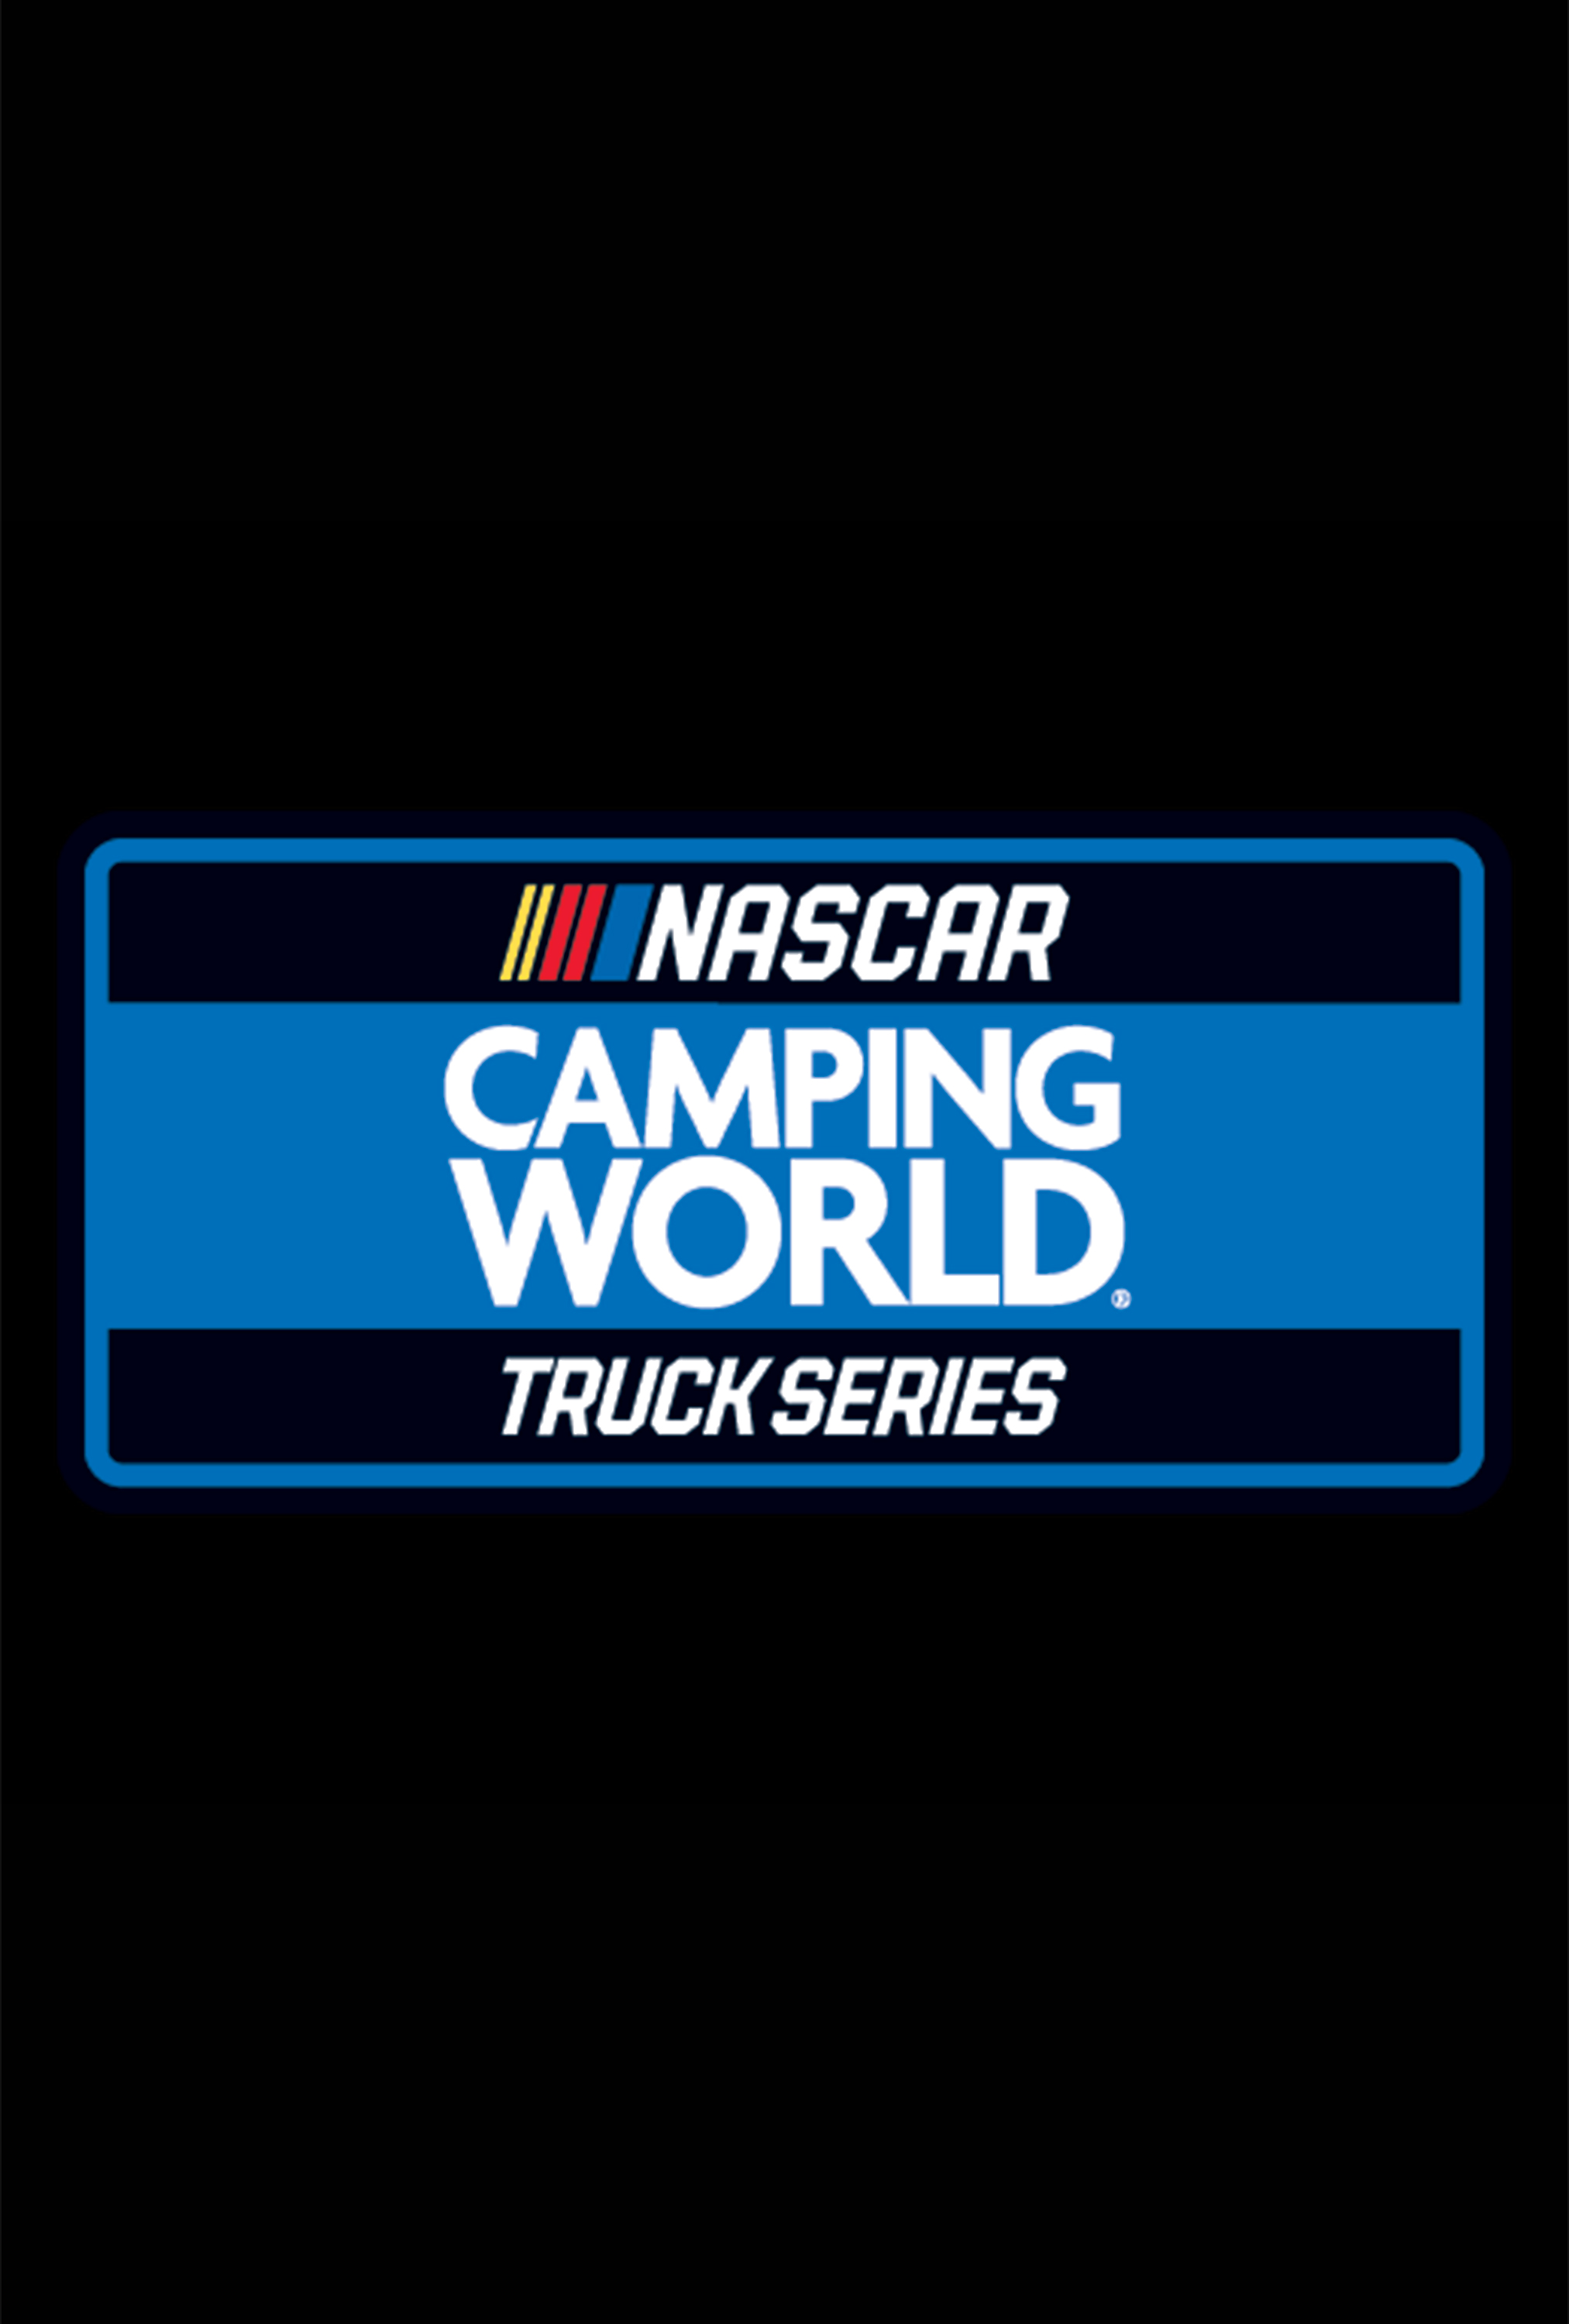 NASCAR Craftsman Truck Series - Where to Watch and Stream